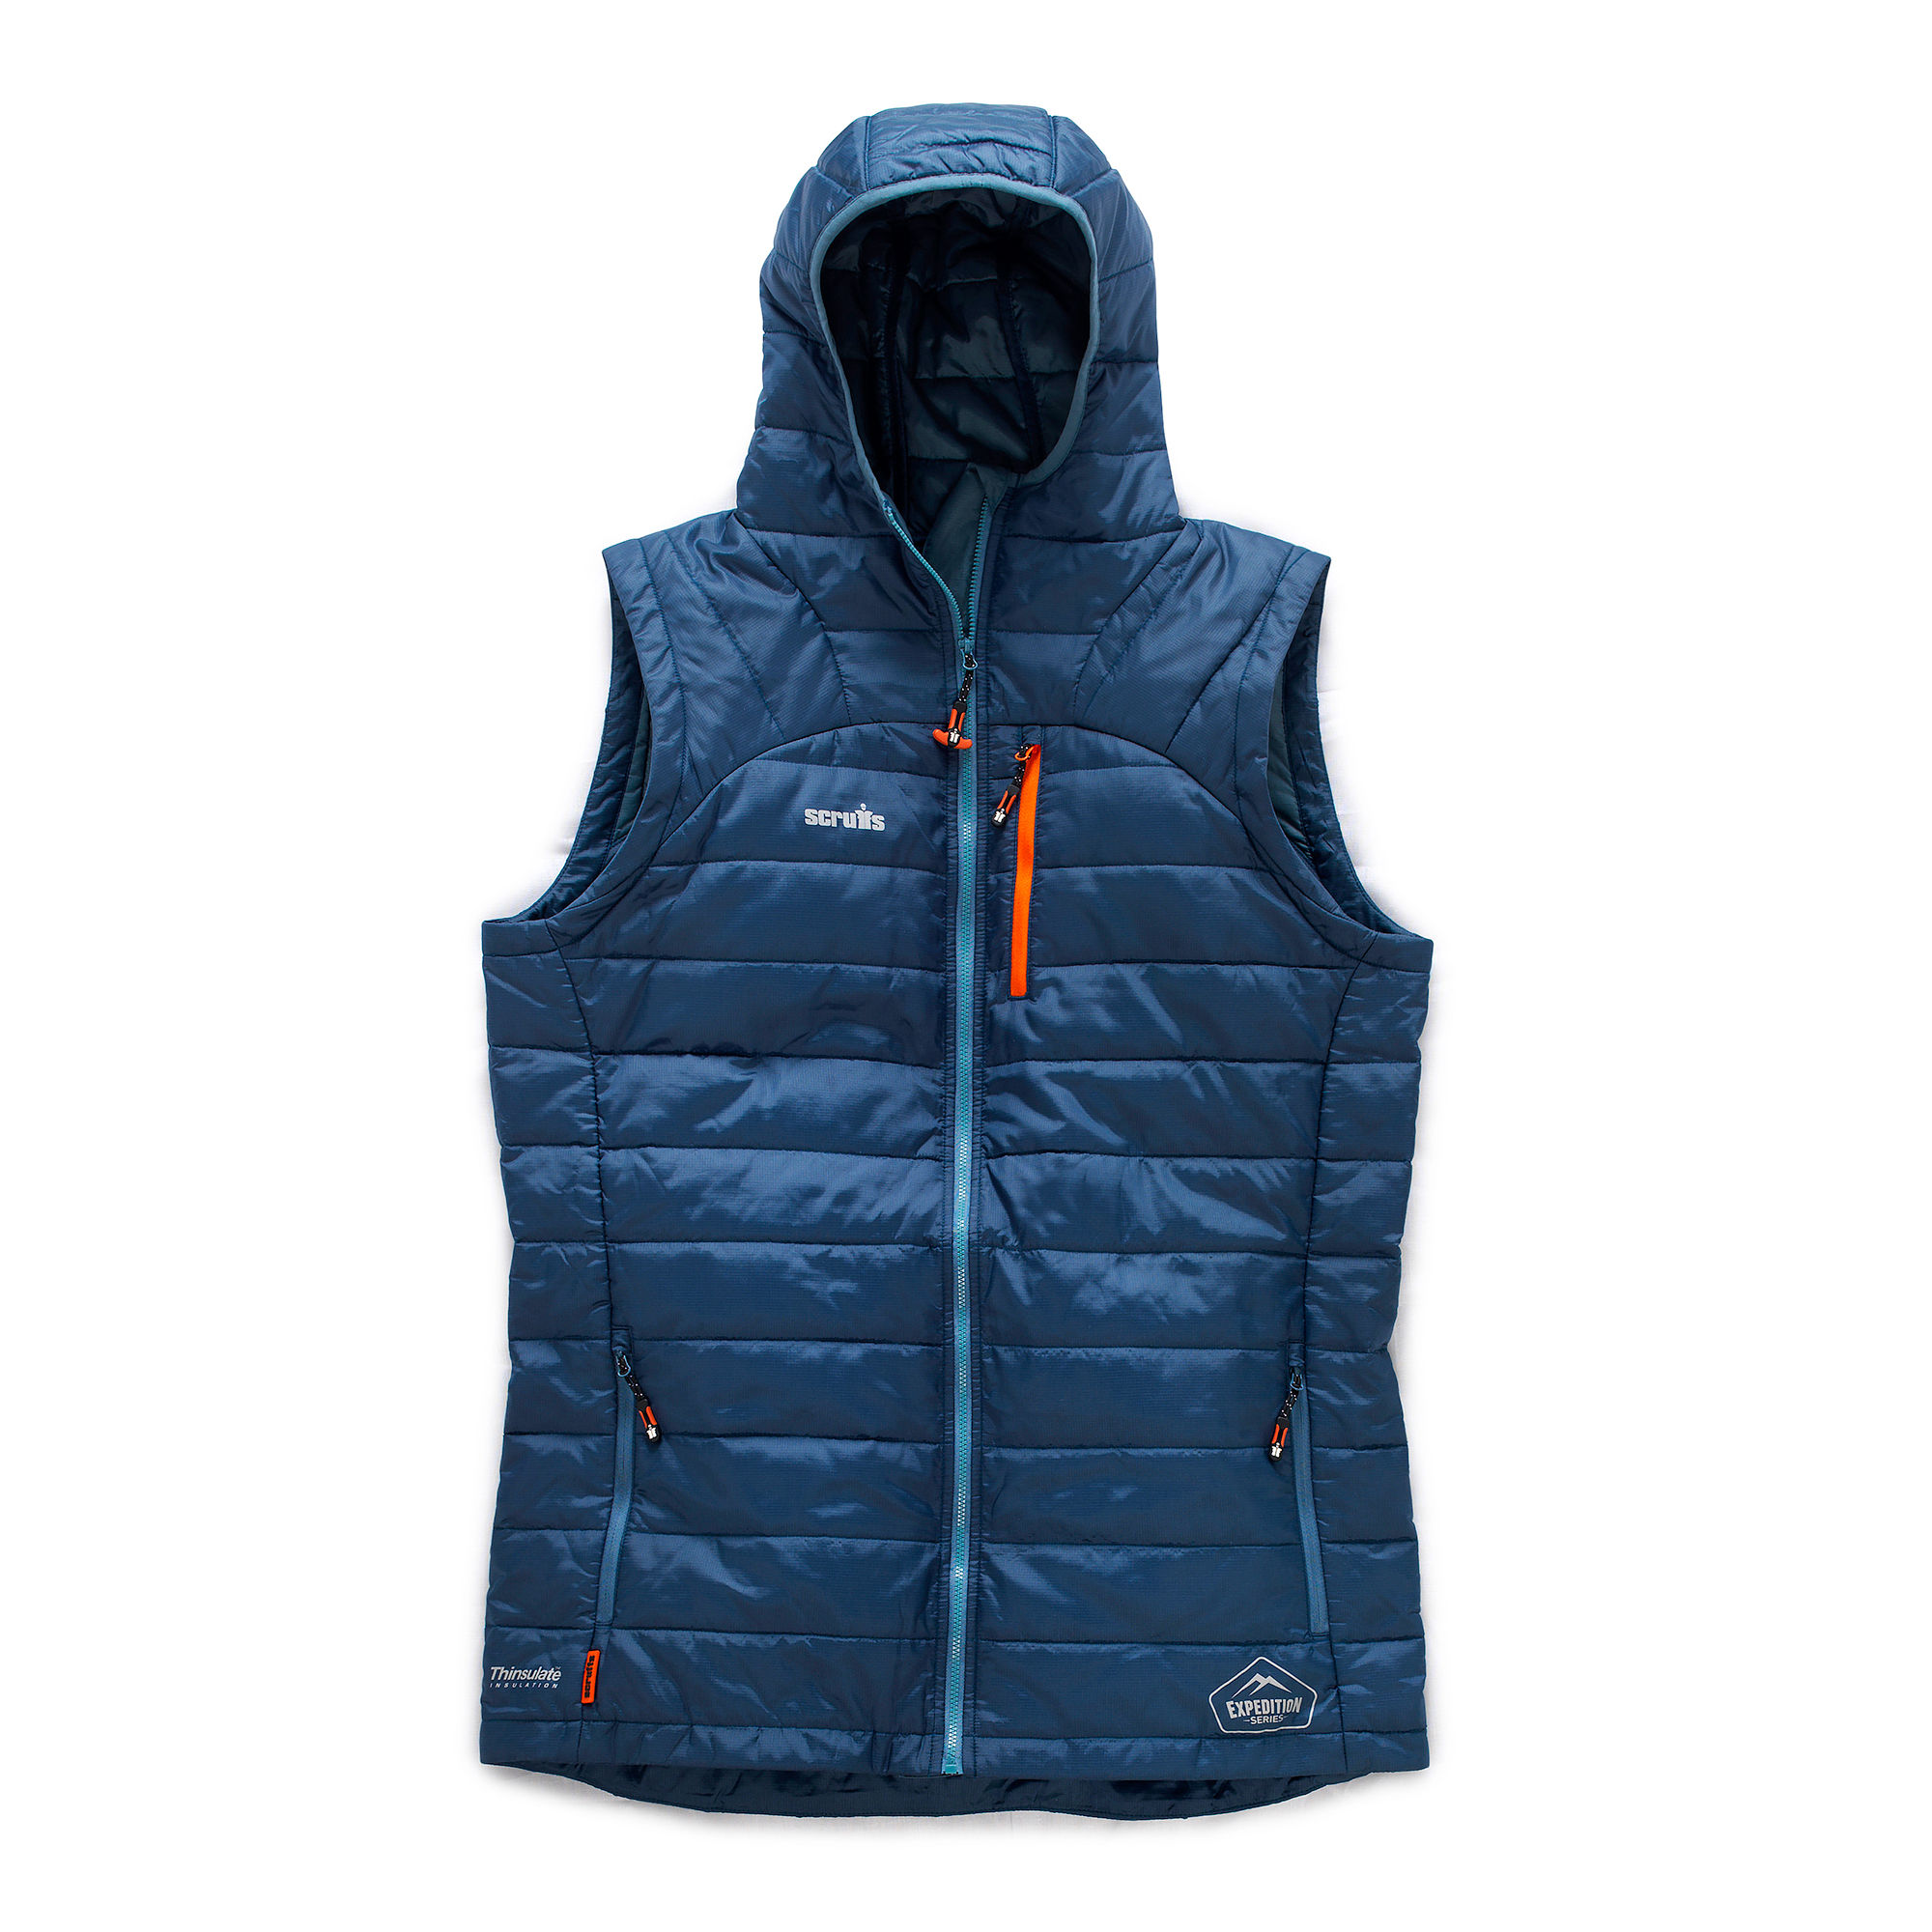 Scruffs Expedition Thermo Gilet-Blue-XXL